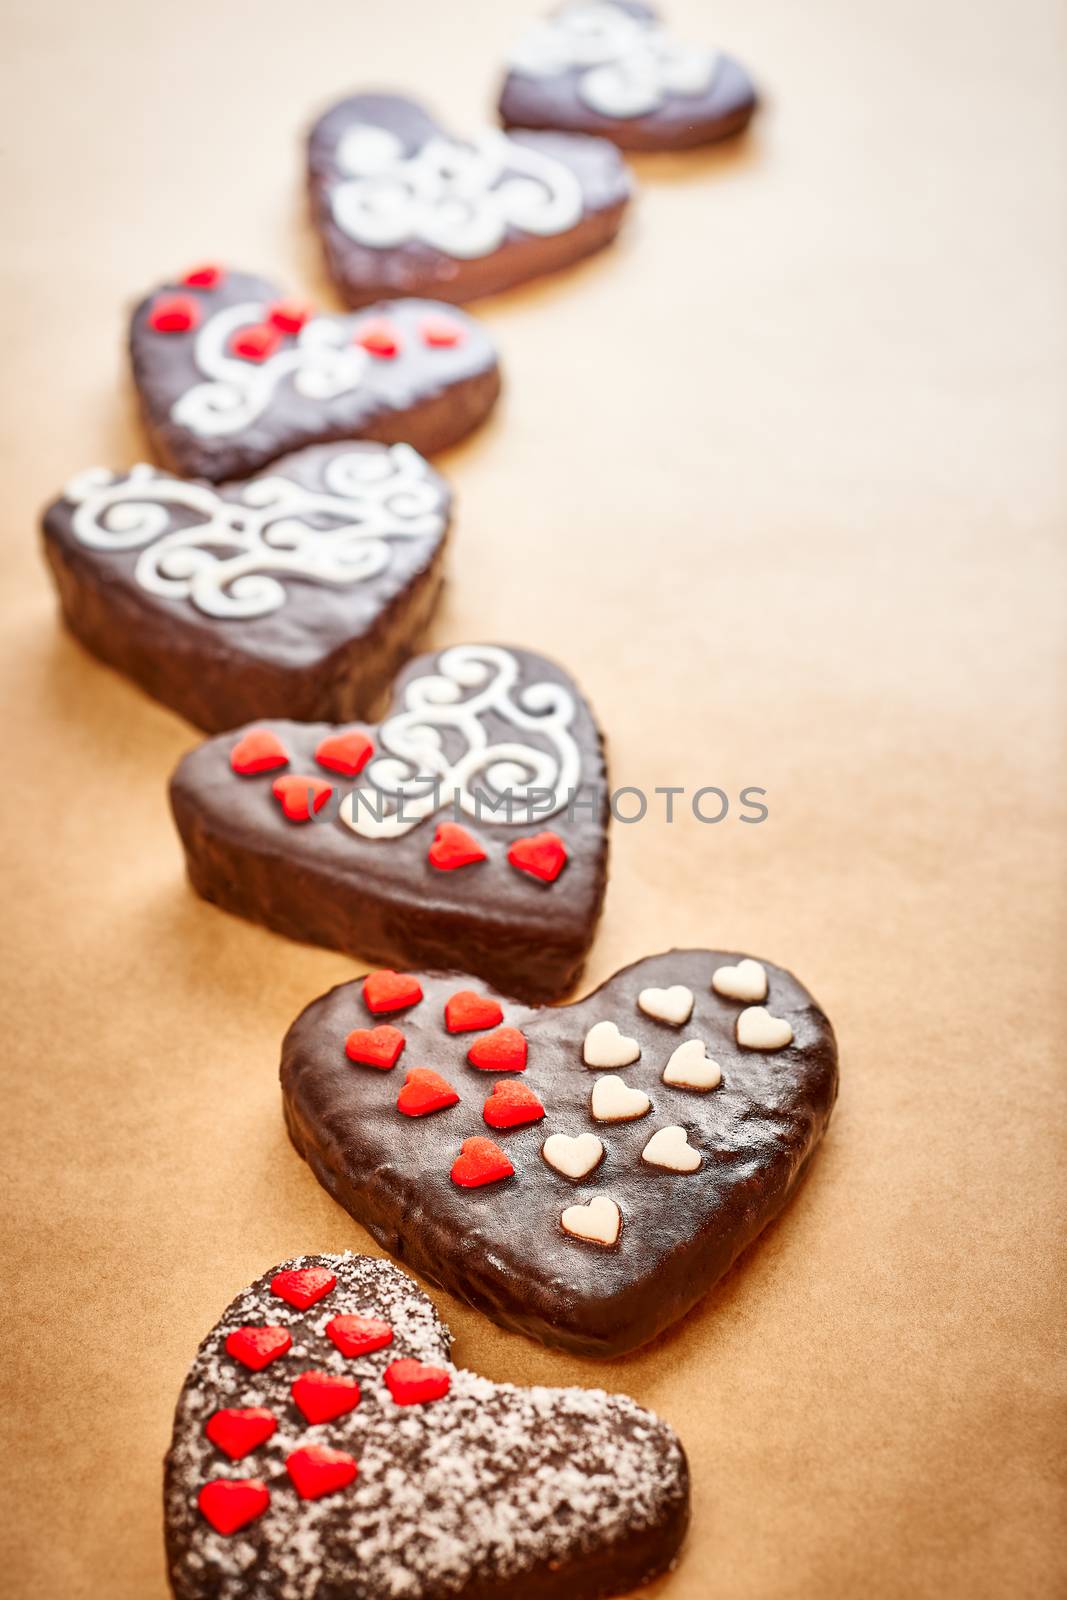 Love, Valentines Day. Hearts Handmade chocolate cakes with decoration on parchment. Romantic sweet unusual creative greeting card